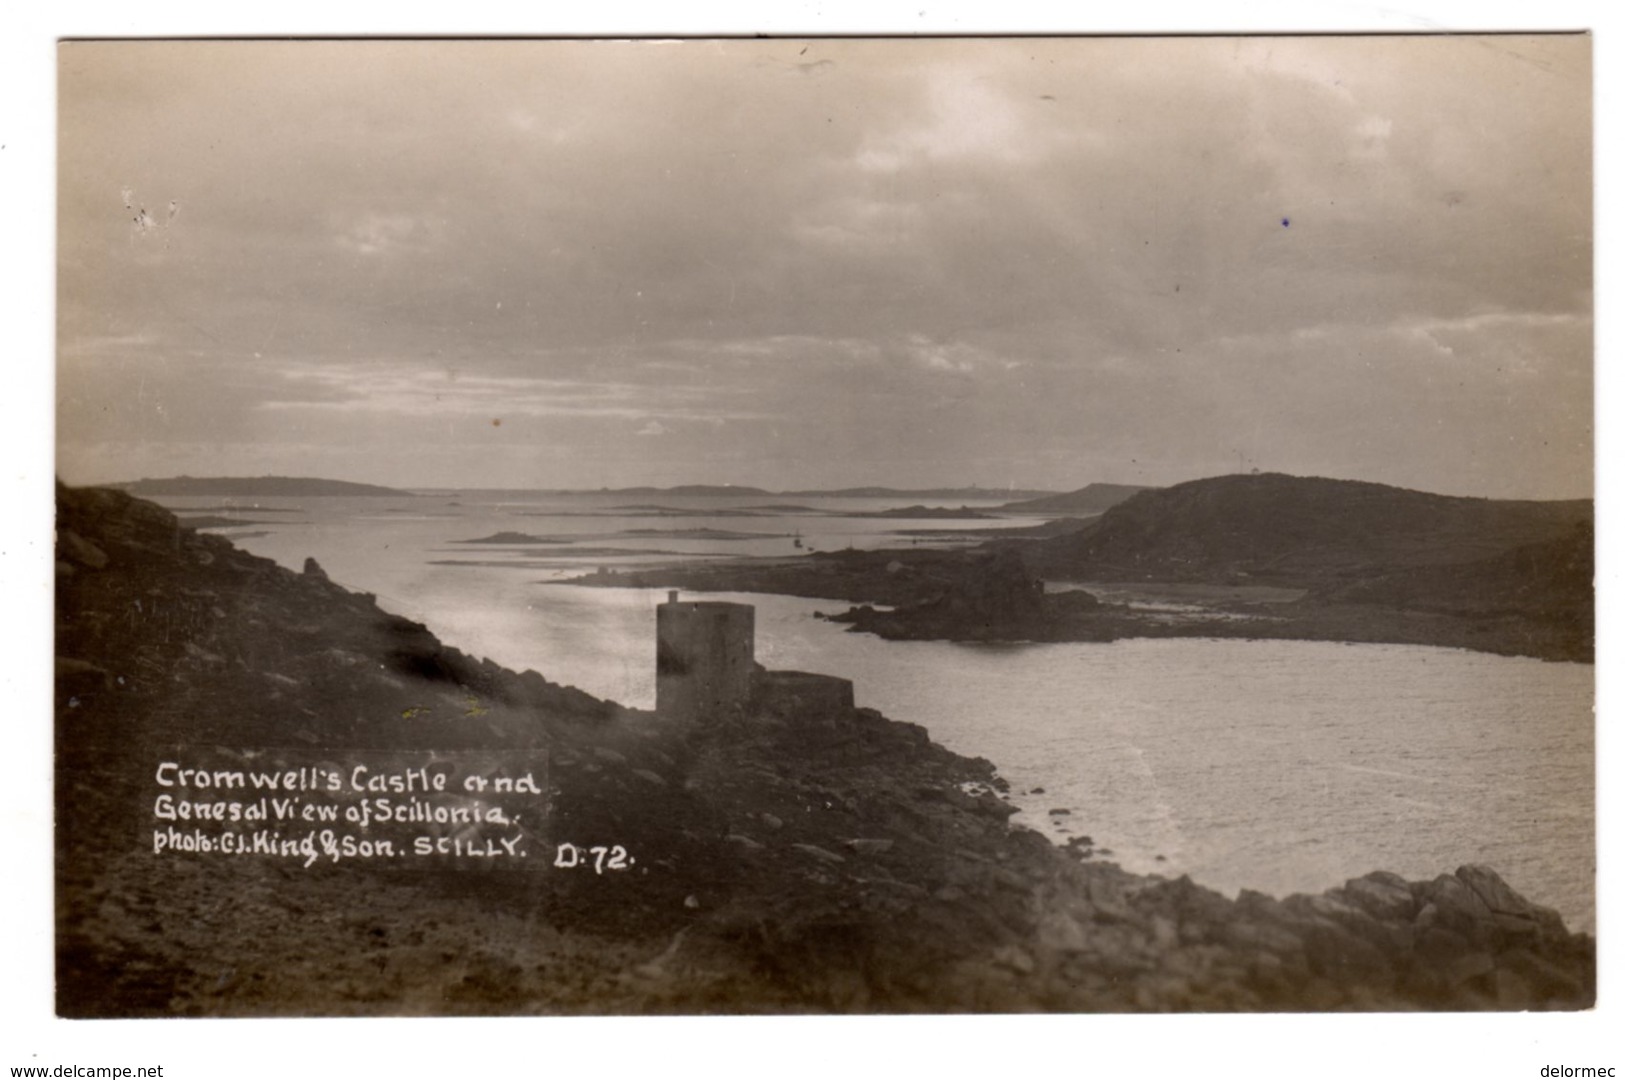 Post Card Photo Photography C.J. King St Mary Isles Of Scilly Cromwell's Castle General View Of Scillonia D 72 - Scilly Isles